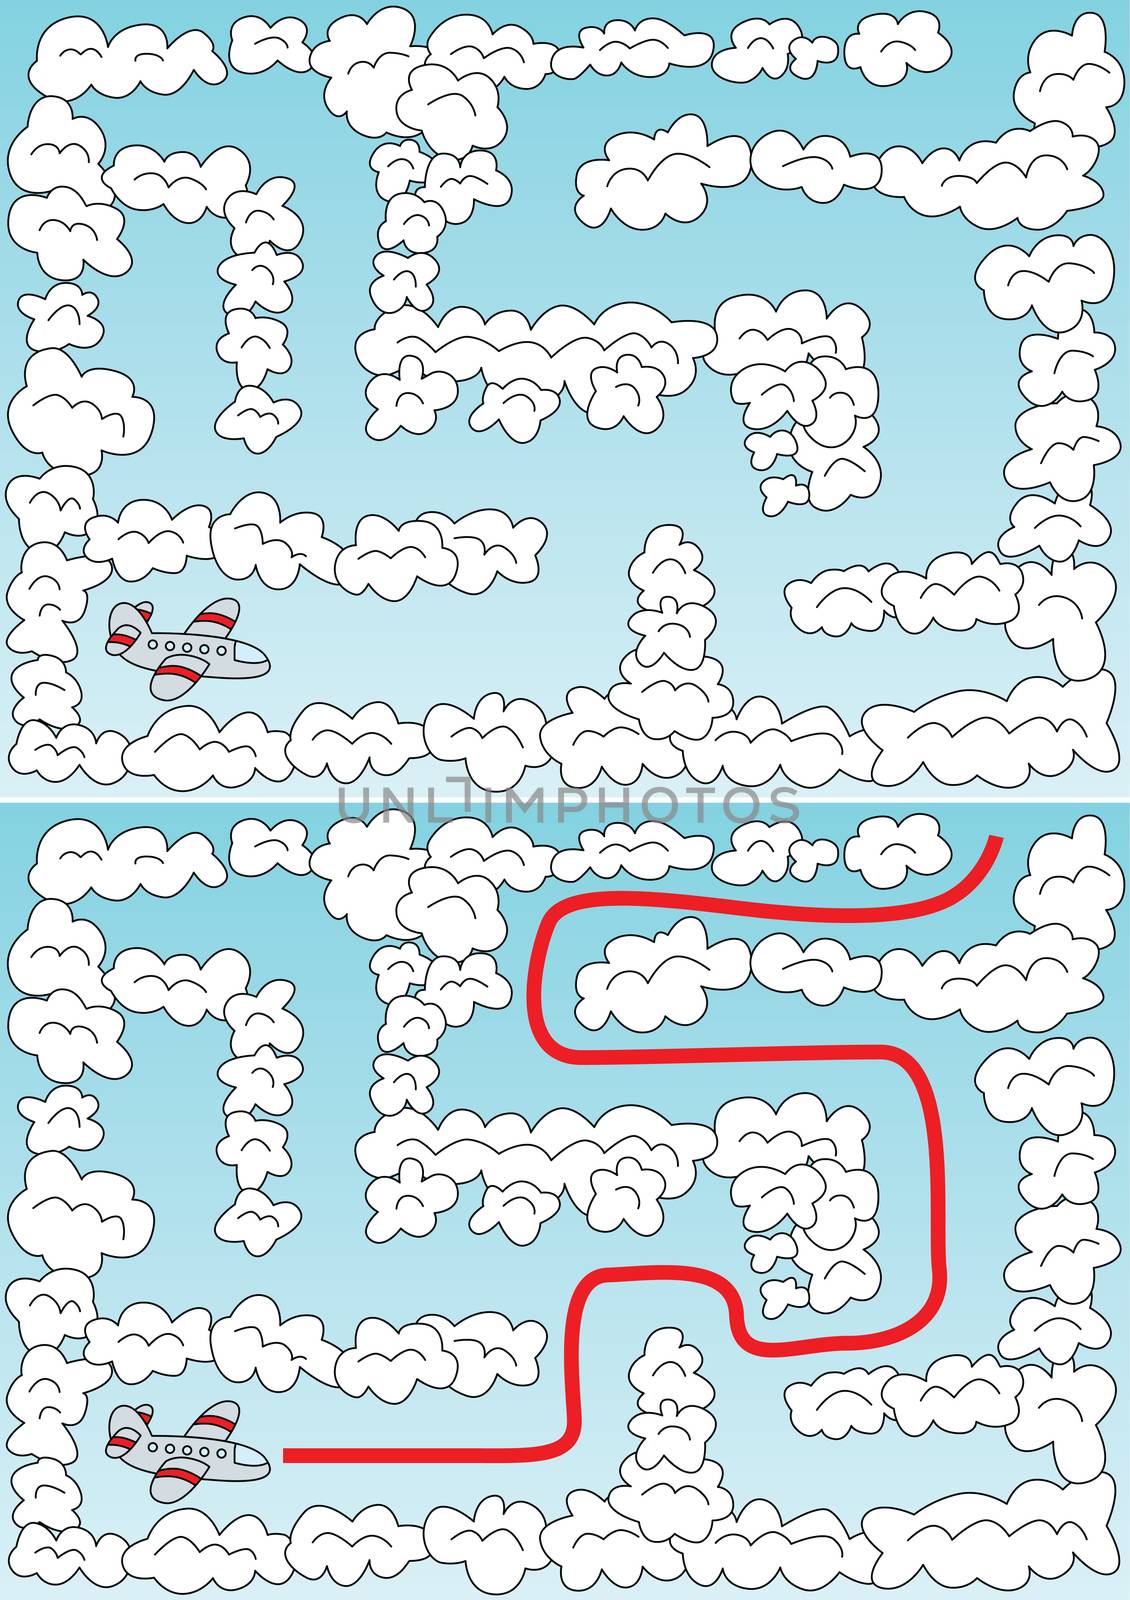 Easy airplane maze for younger kids with a solution